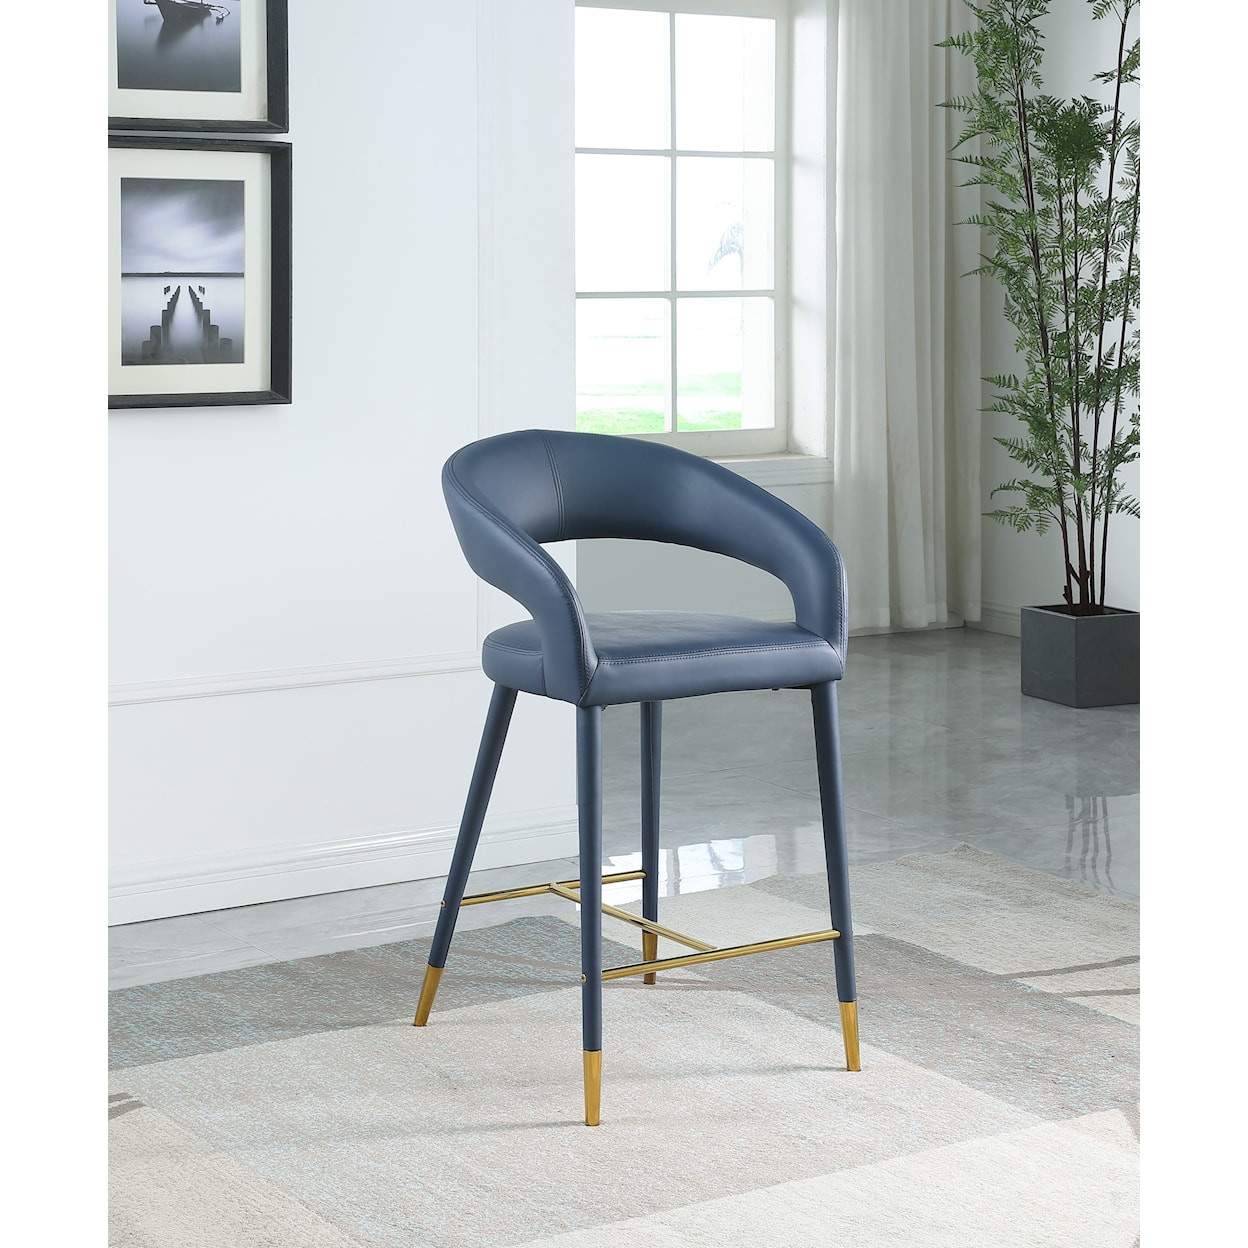 Meridian Furniture Destiny Upholstered Navy Faux Leather Counter Stool